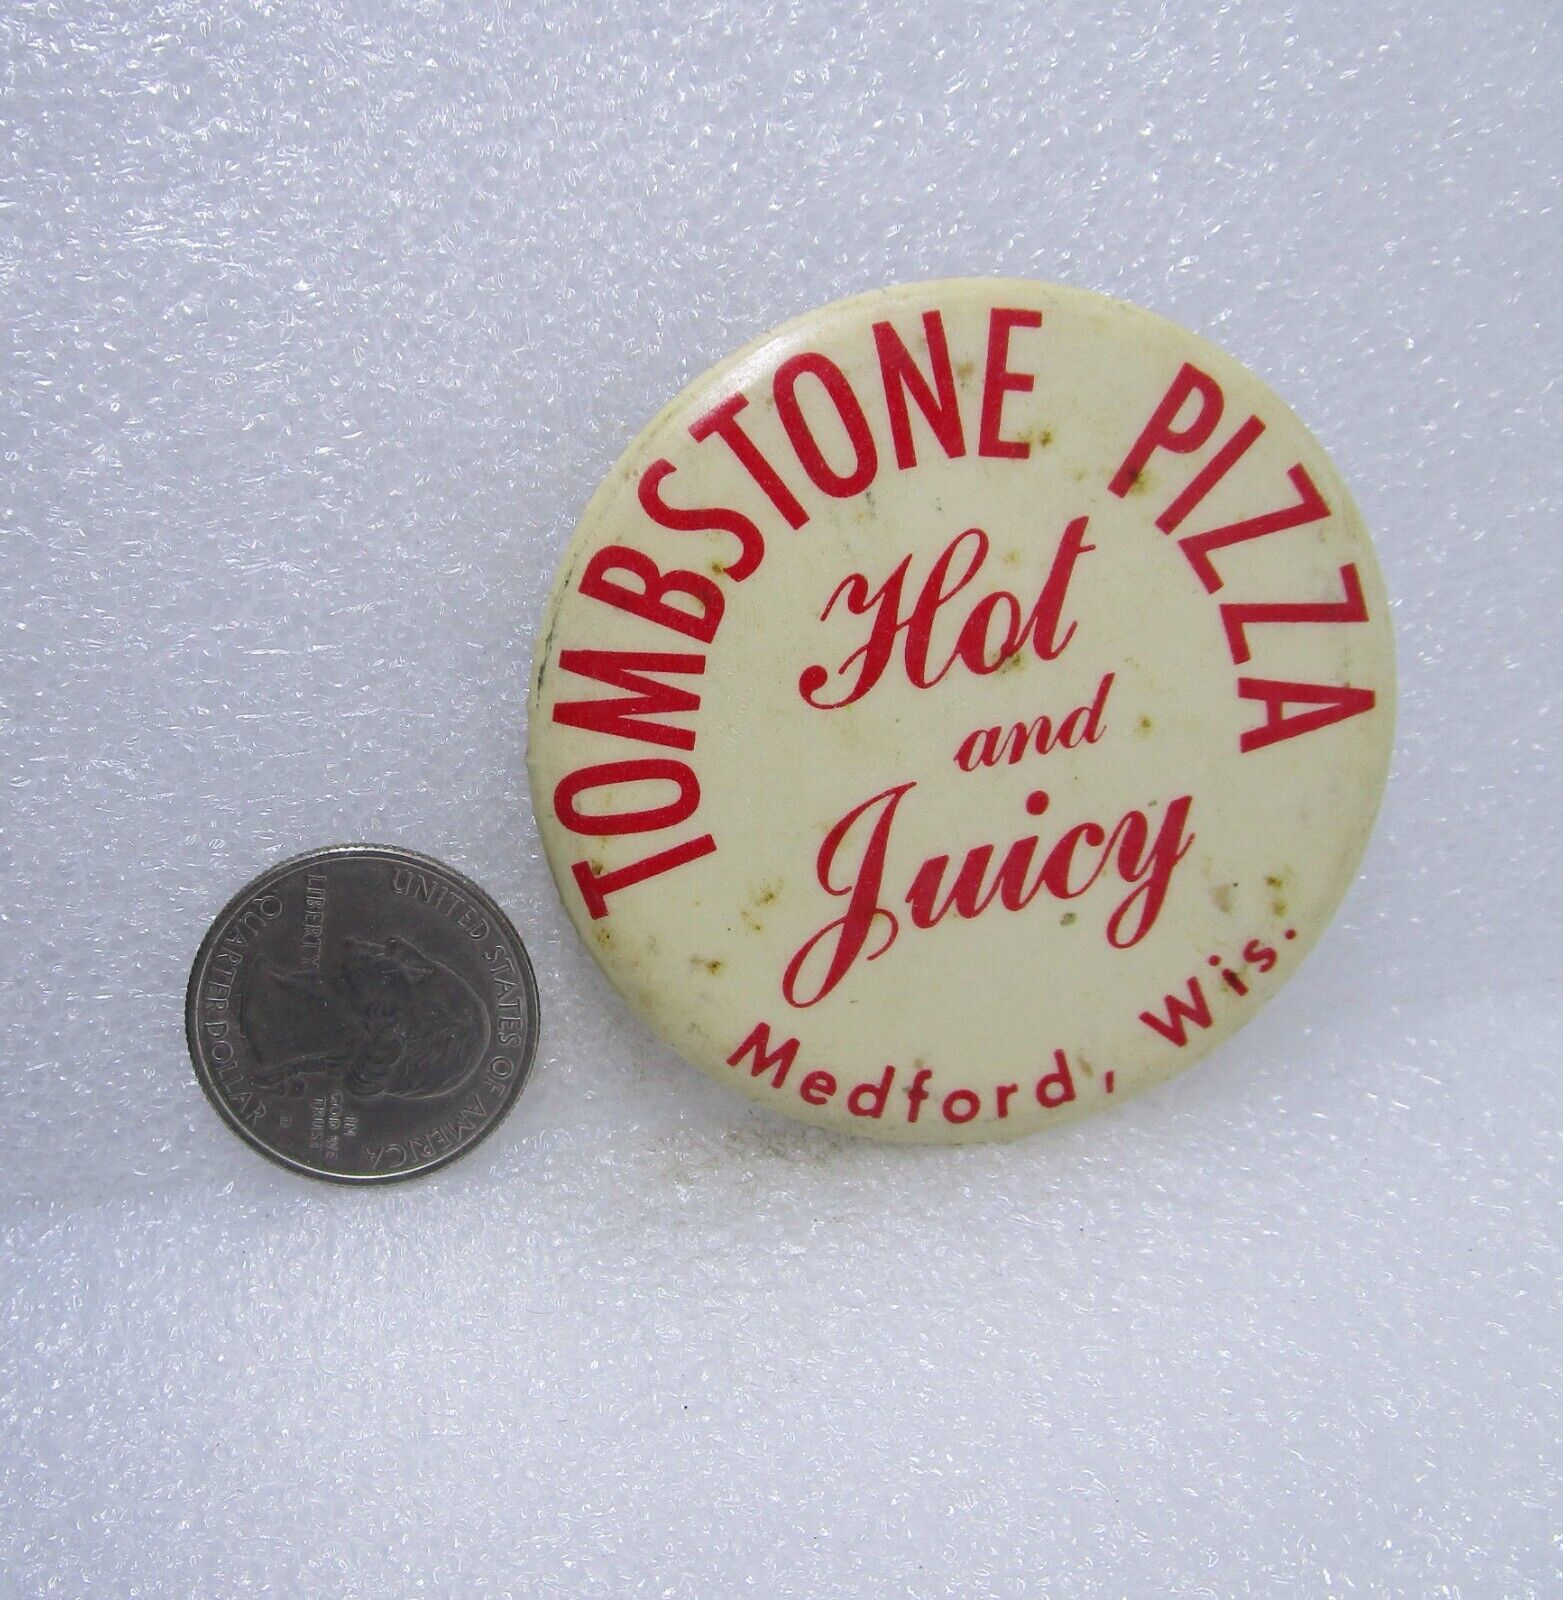 Tombstone Pizza Hot And Juicy Medford Wisconsin Button Pin